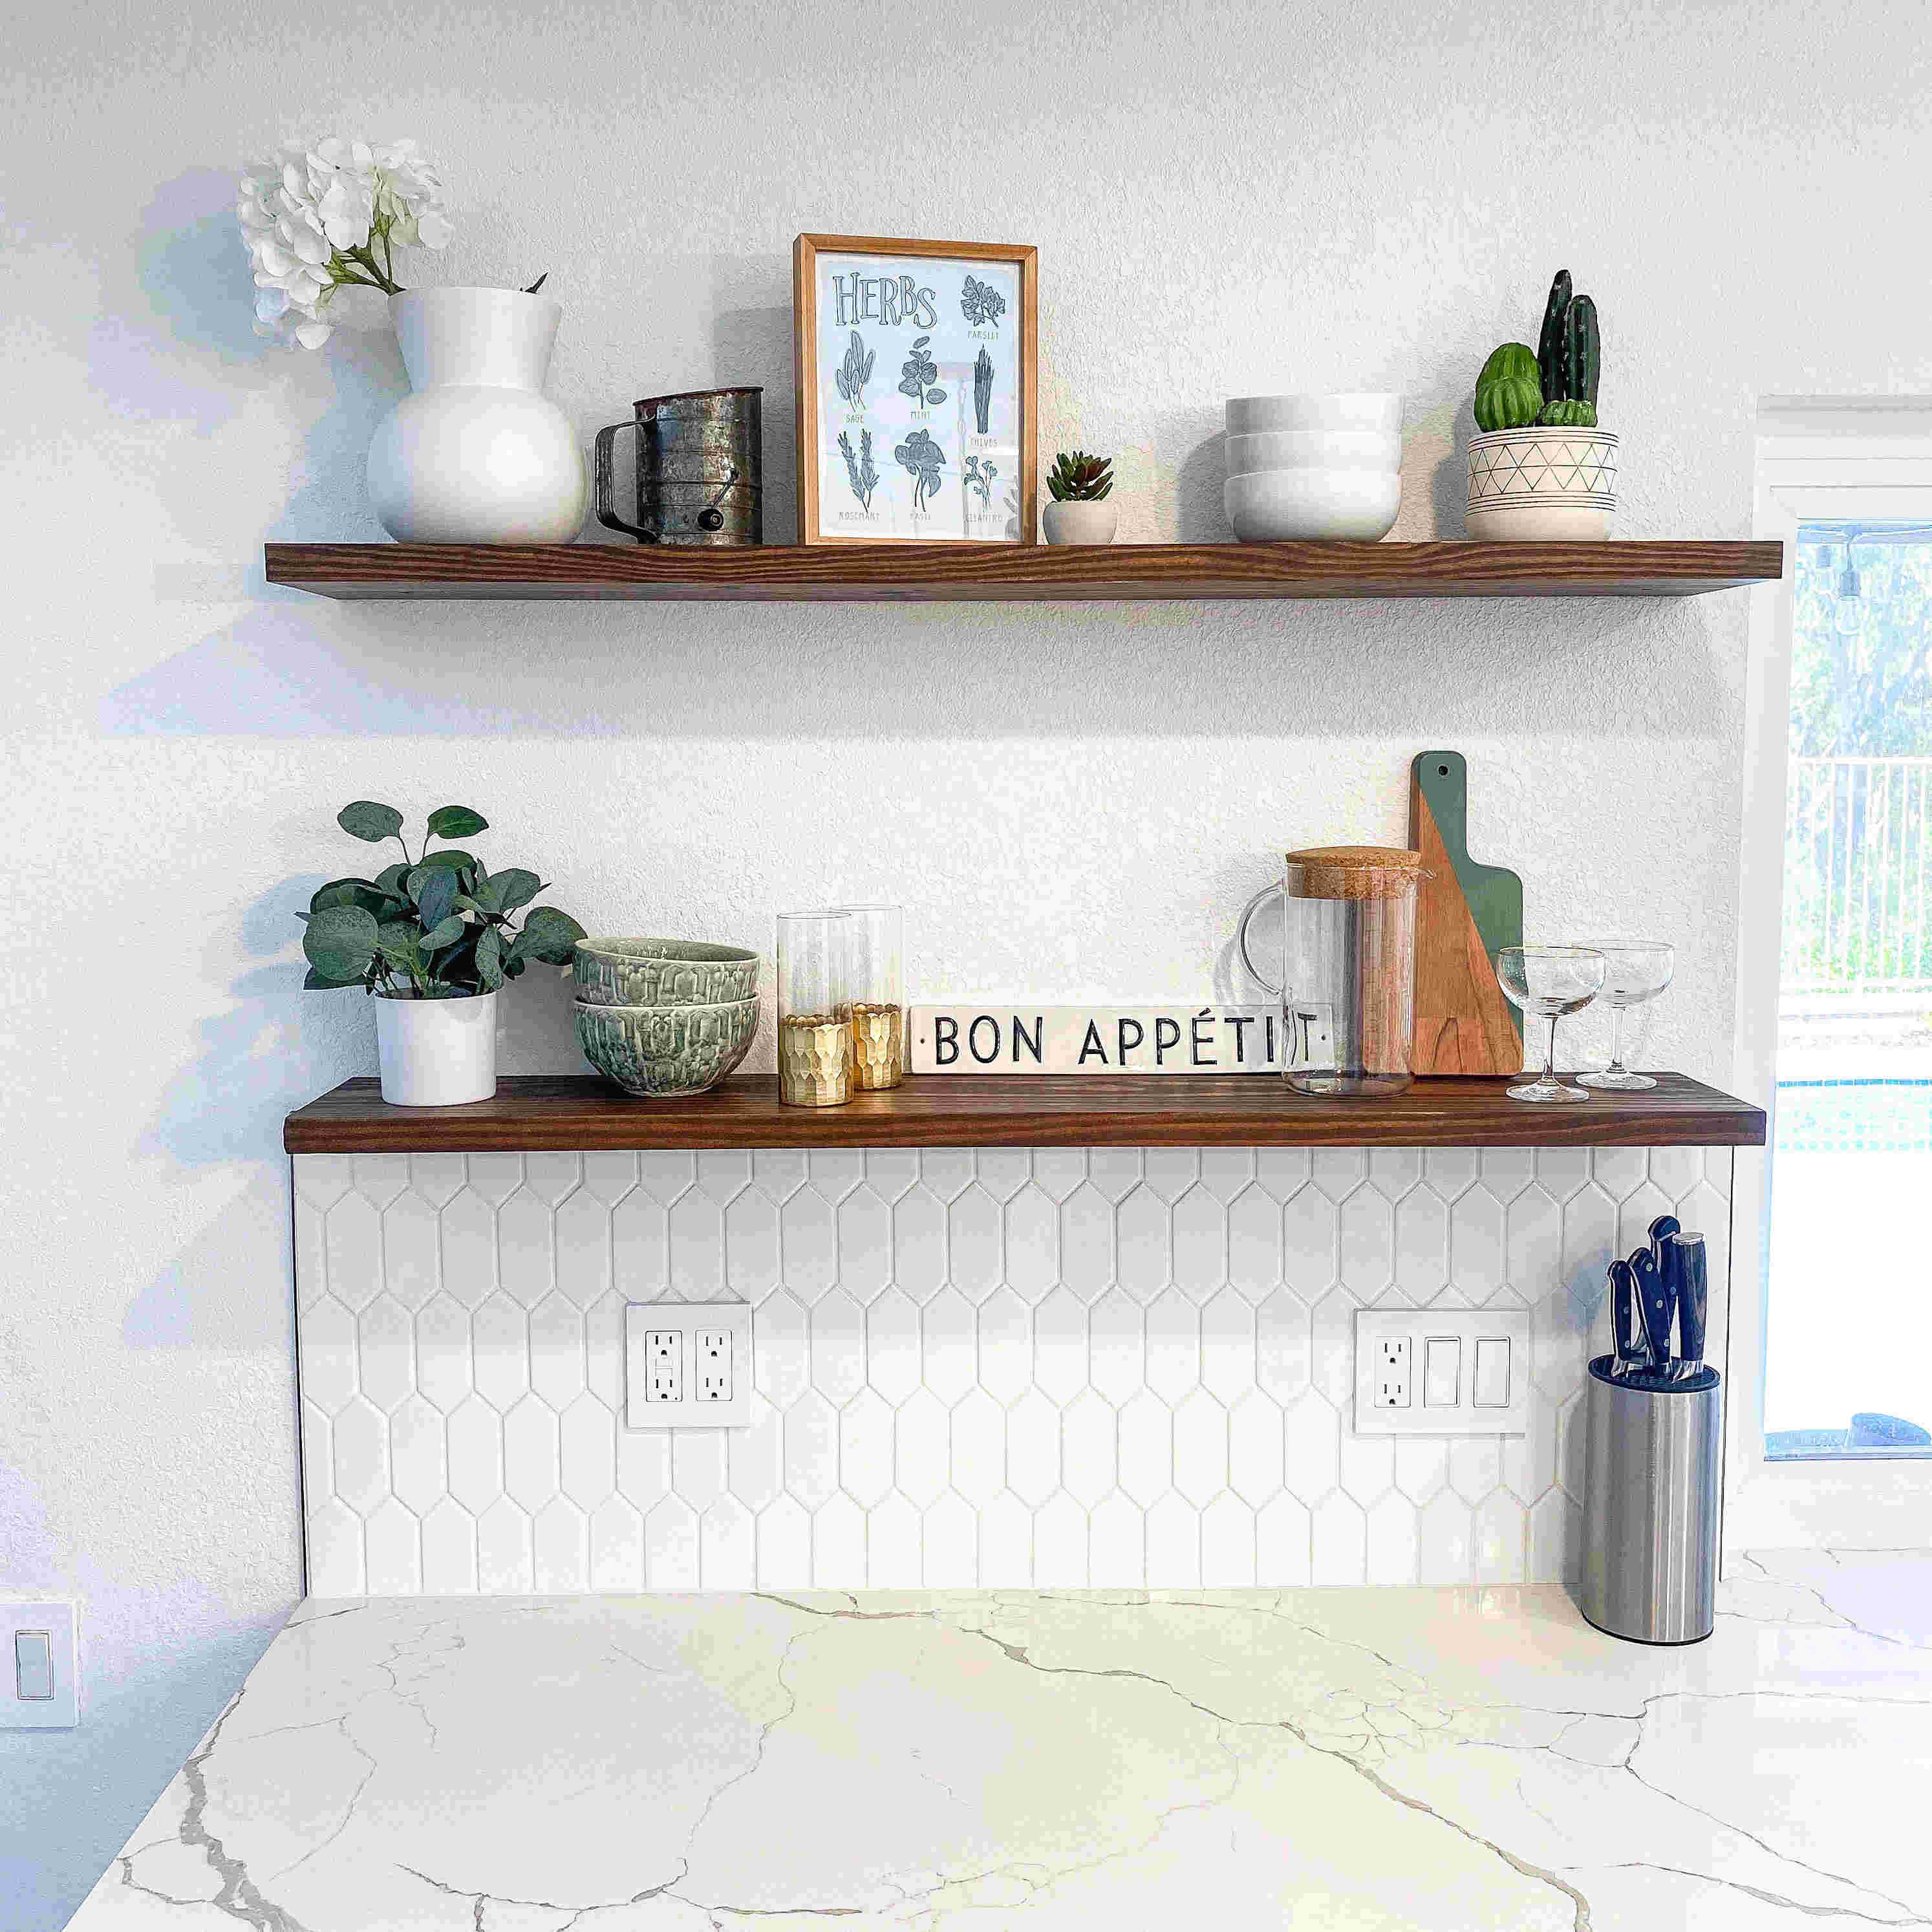 How to Install Renter-Friendly Shelves Into Your Apartment